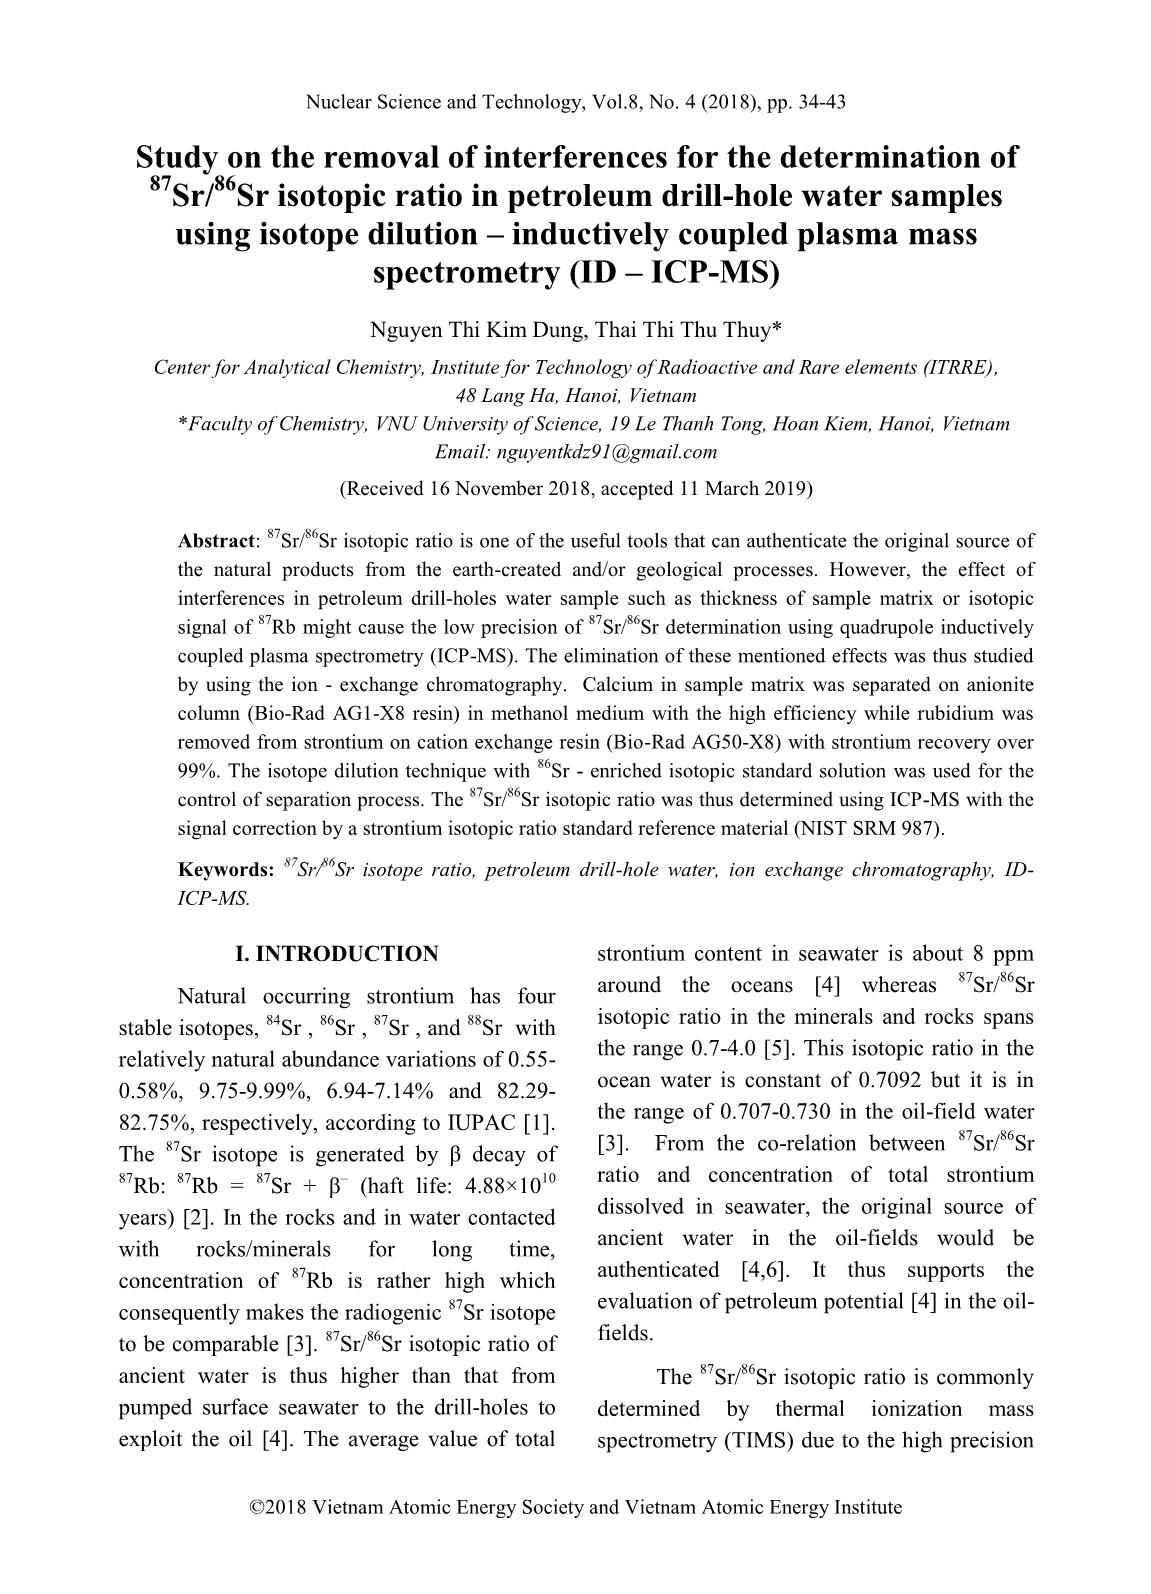 Study on the removal of interferences for the determination of ⁸⁷Sr/⁸⁶Sr isotopic ratio in petroleum drill-Hole water samples using isotope dilution – inductively coupled plasma mass spectrometry (ID-ICP-MS) trang 1